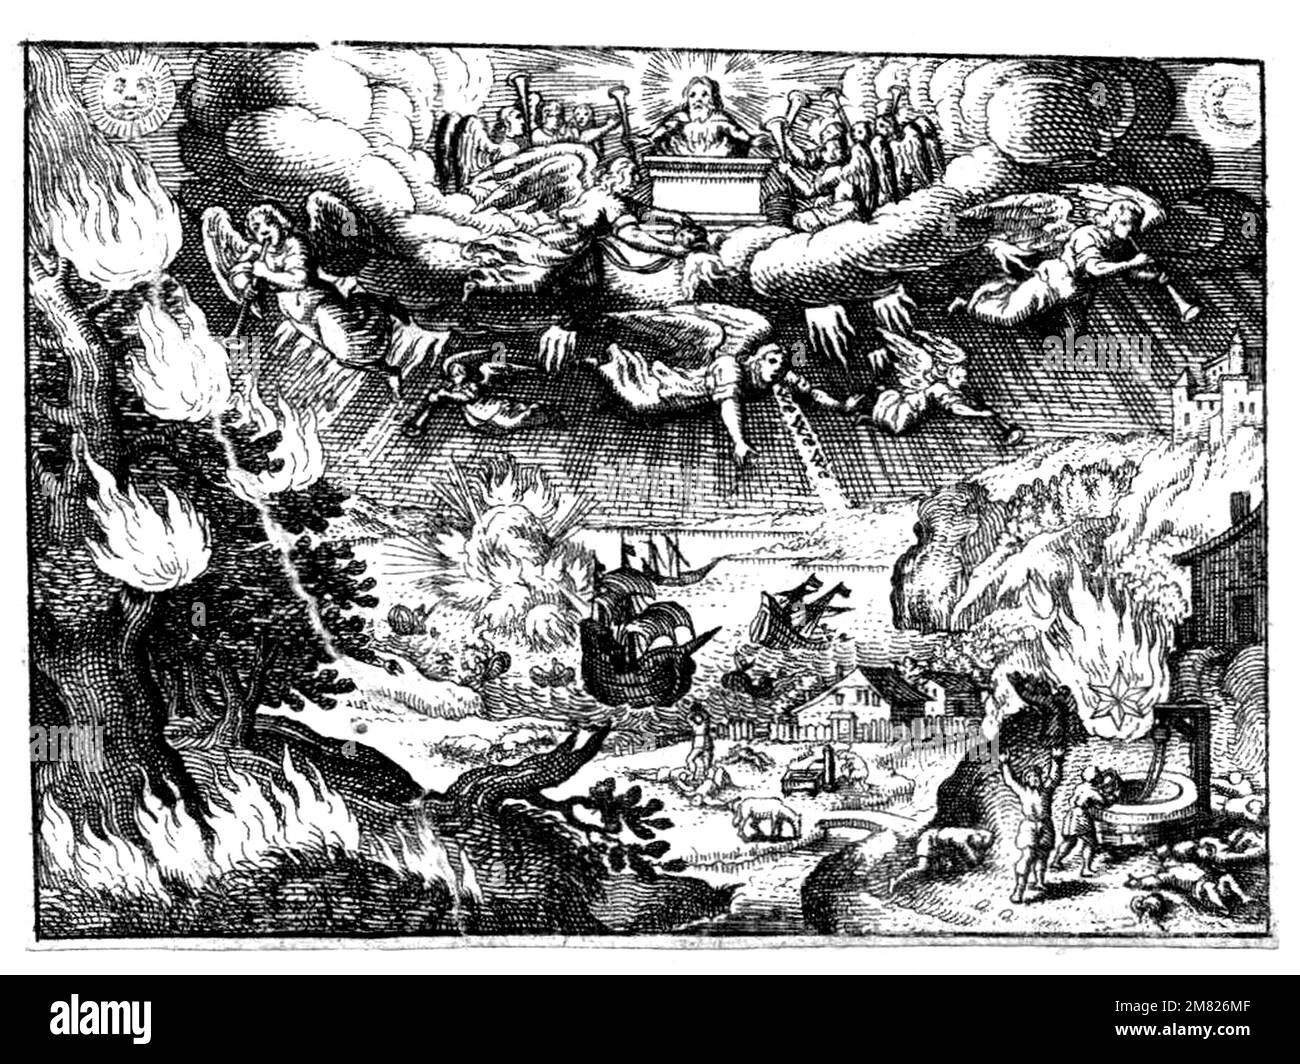 1550 ca, FRANCE : French ancient engraving depicting the Fall of the towns of SODOM and GOMORRAH . A story of OLD TESTAMENT , from a Bible ediction of XVI Century . Engraving  by french Étienne Delaune ( 1518 - 1583 ). - HISTORY - FOTO STORICHE - ANTICO TESTAMENTO - ISRAELE - JEWISH PEOPLE - EBREO - POPOLO EBRAICO - illustrazione - illustration - engraving - incisione - BIBBIA - VICENDA - STORICA BIBLICA - BIBBIA - BIBLE HISTORY  - RELIGION - RELIGIONE - Caduta di SODOMA e GOMORRA - LGBTQ - GAY - homosexuality - omosessualità - homosexual - omosessuale - Sodomy - Sodomia - Sodomiti - CASTIGO D Stock Photo